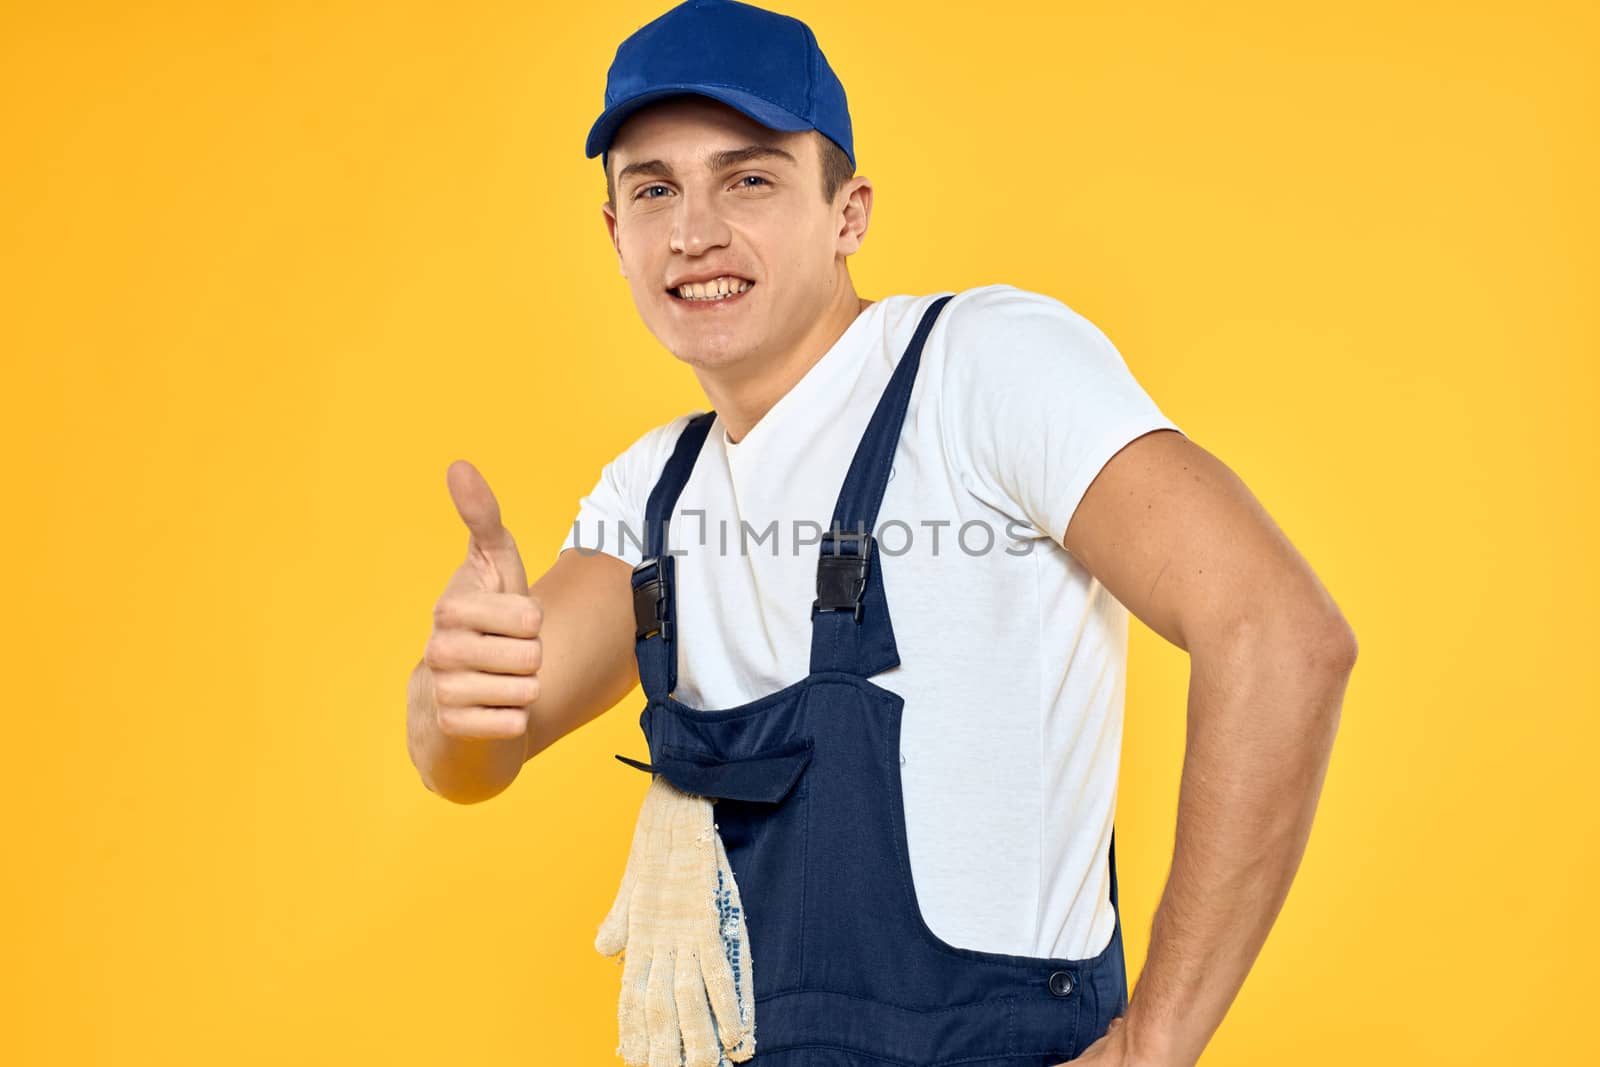 Man in working uniform emotions rendering service delivery service yellow background by SHOTPRIME